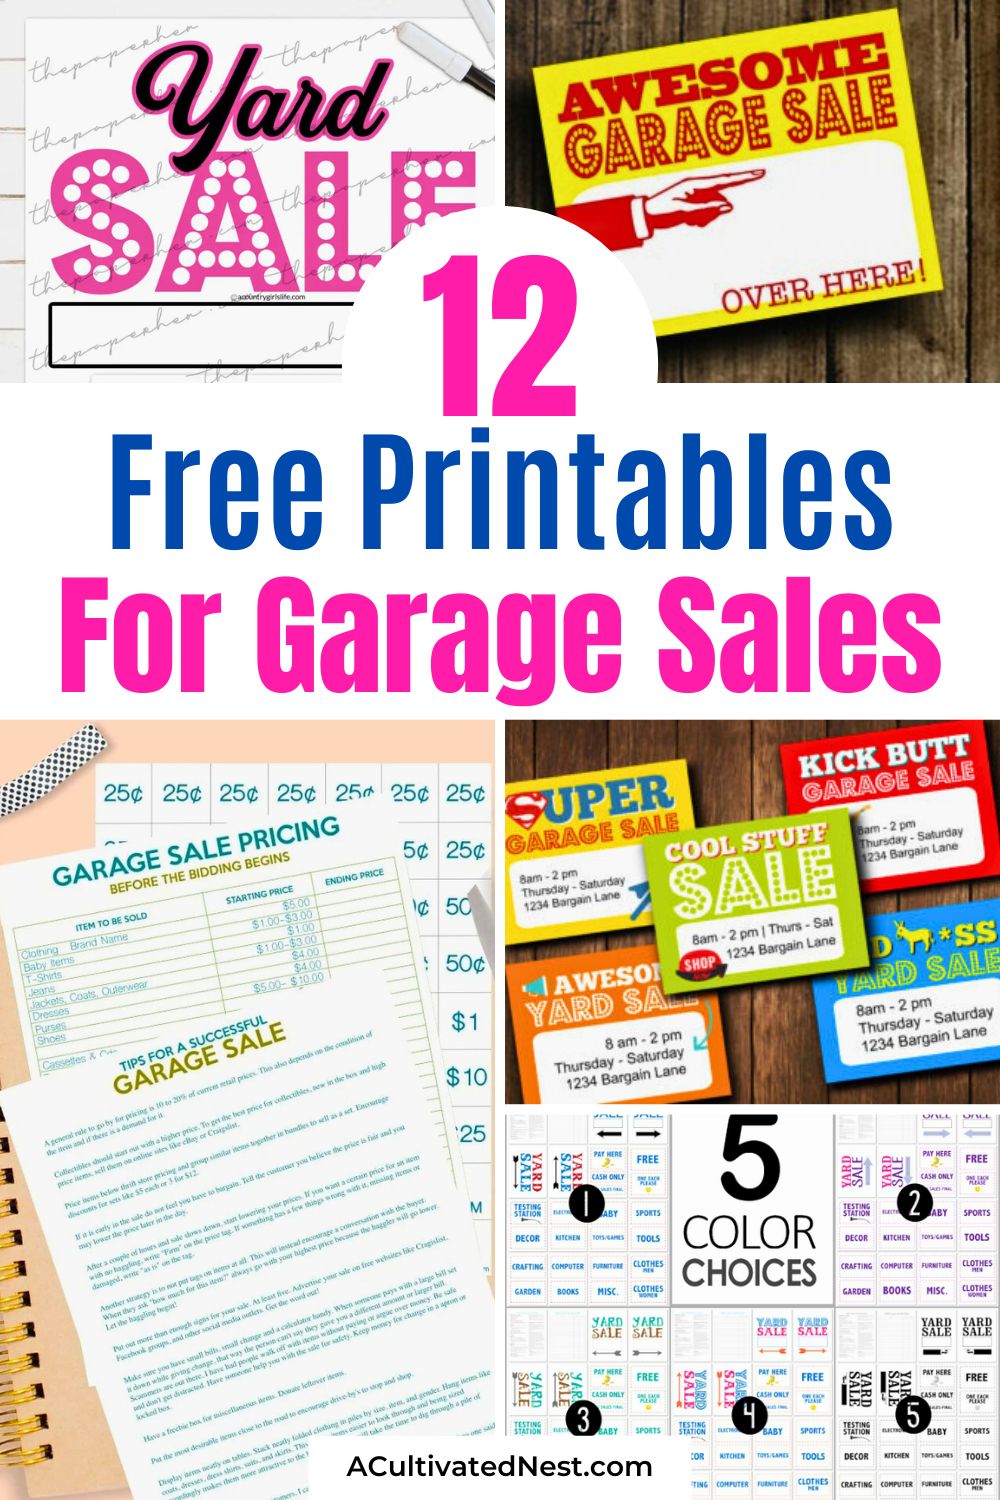 12 Handy Garage Sale Free Printables- Hosting a garage sale? Don’t miss out on these essential garage sale free printables to streamline your sale. Perfect for pricing, signage, and more. Click to download and get ready to sell like a pro! | #GarageSaleTips #FreePrintables #Declutter #yardSaleTips #ACultivatedNest